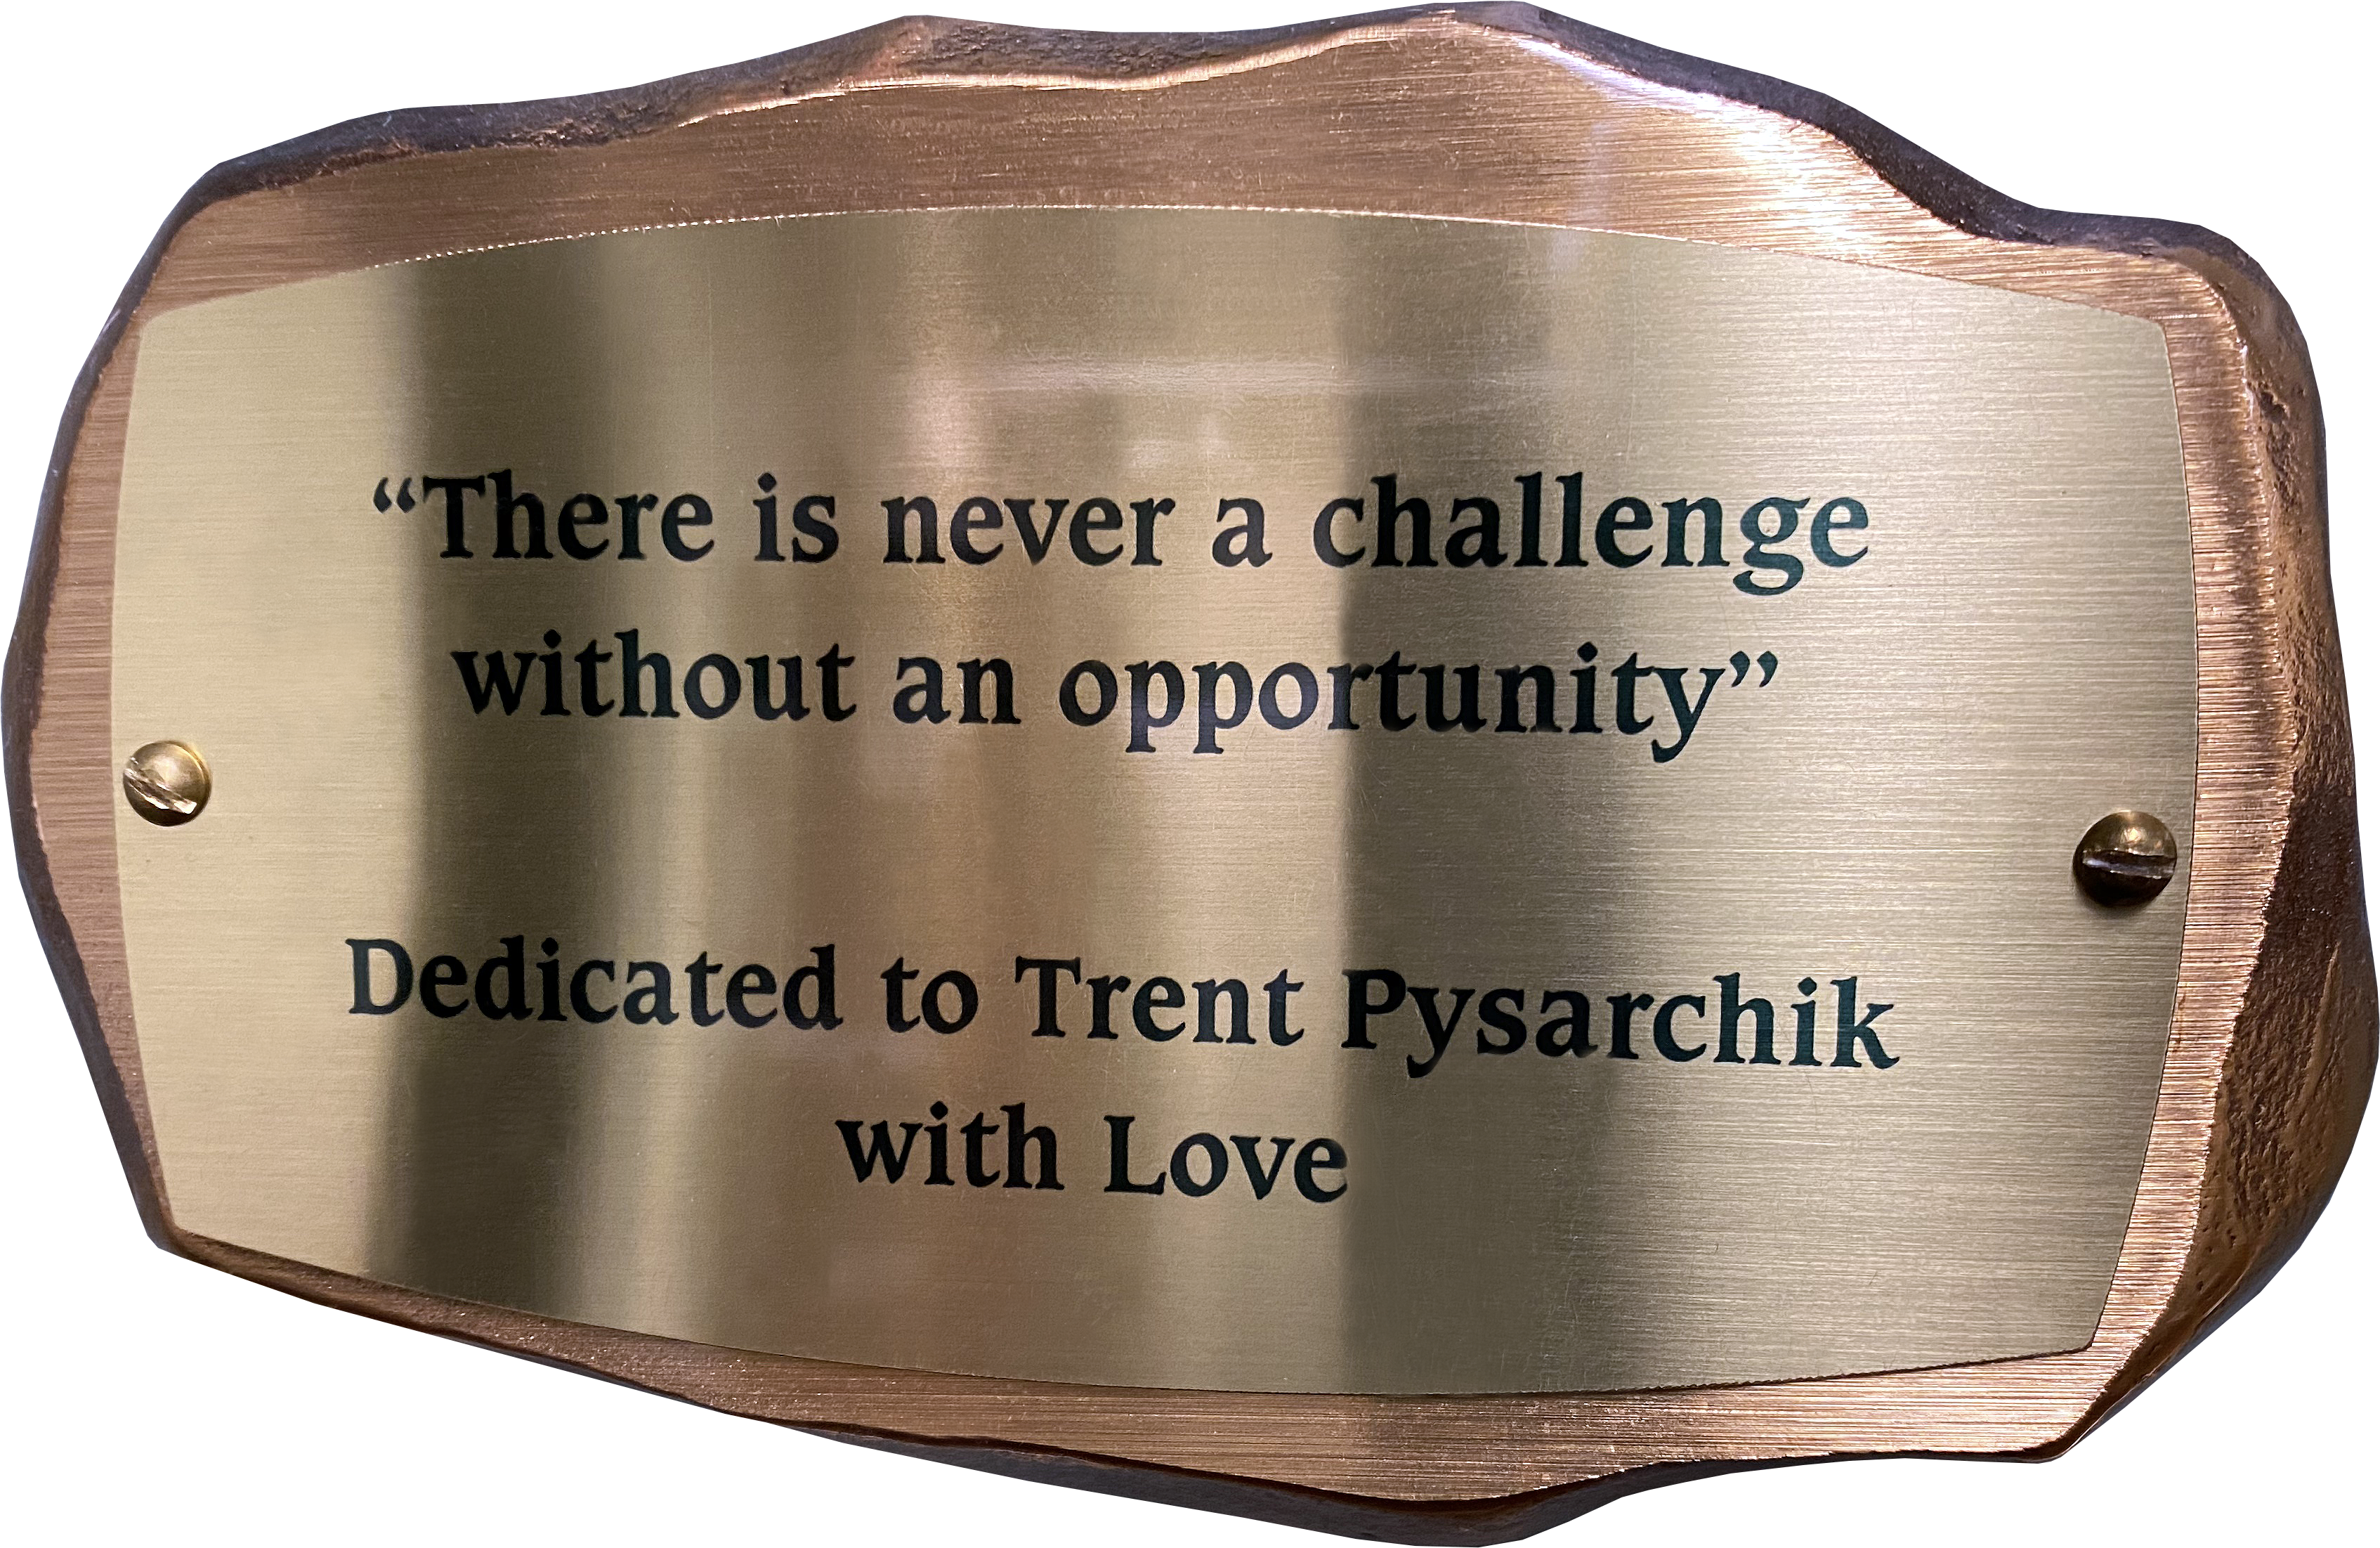 Inscribed bronze plaque in the shape of a rock with text on it reading: "There is never a challenge without an opportunity" Dedicated to Trent Pysarchik with Love